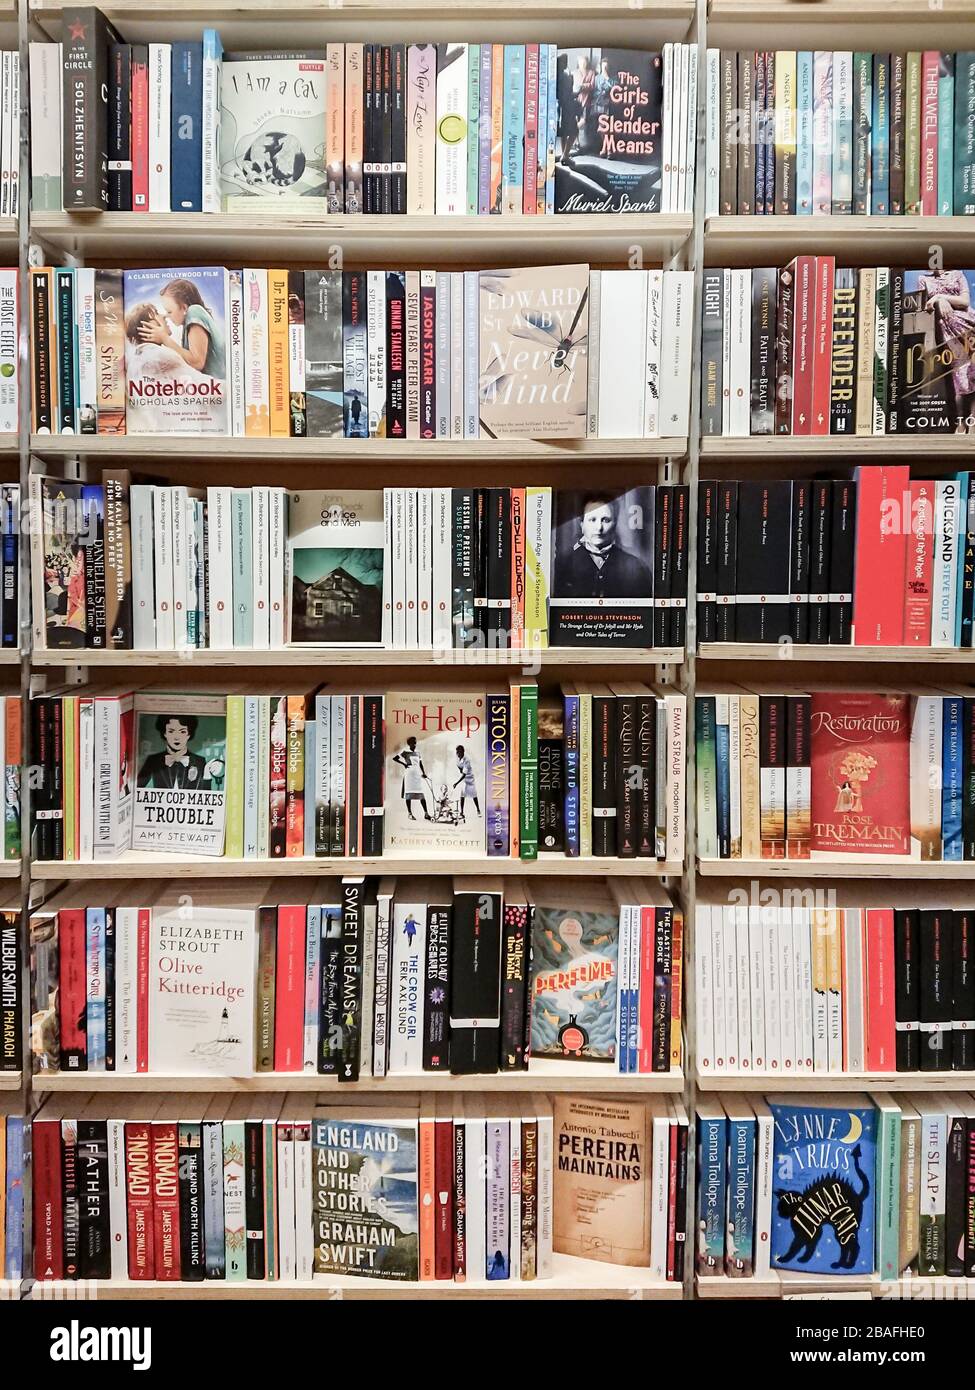 Book shop. Full frame image of classic and modern fiction paperback books and novels on the shelves of a book store. Stock Photo